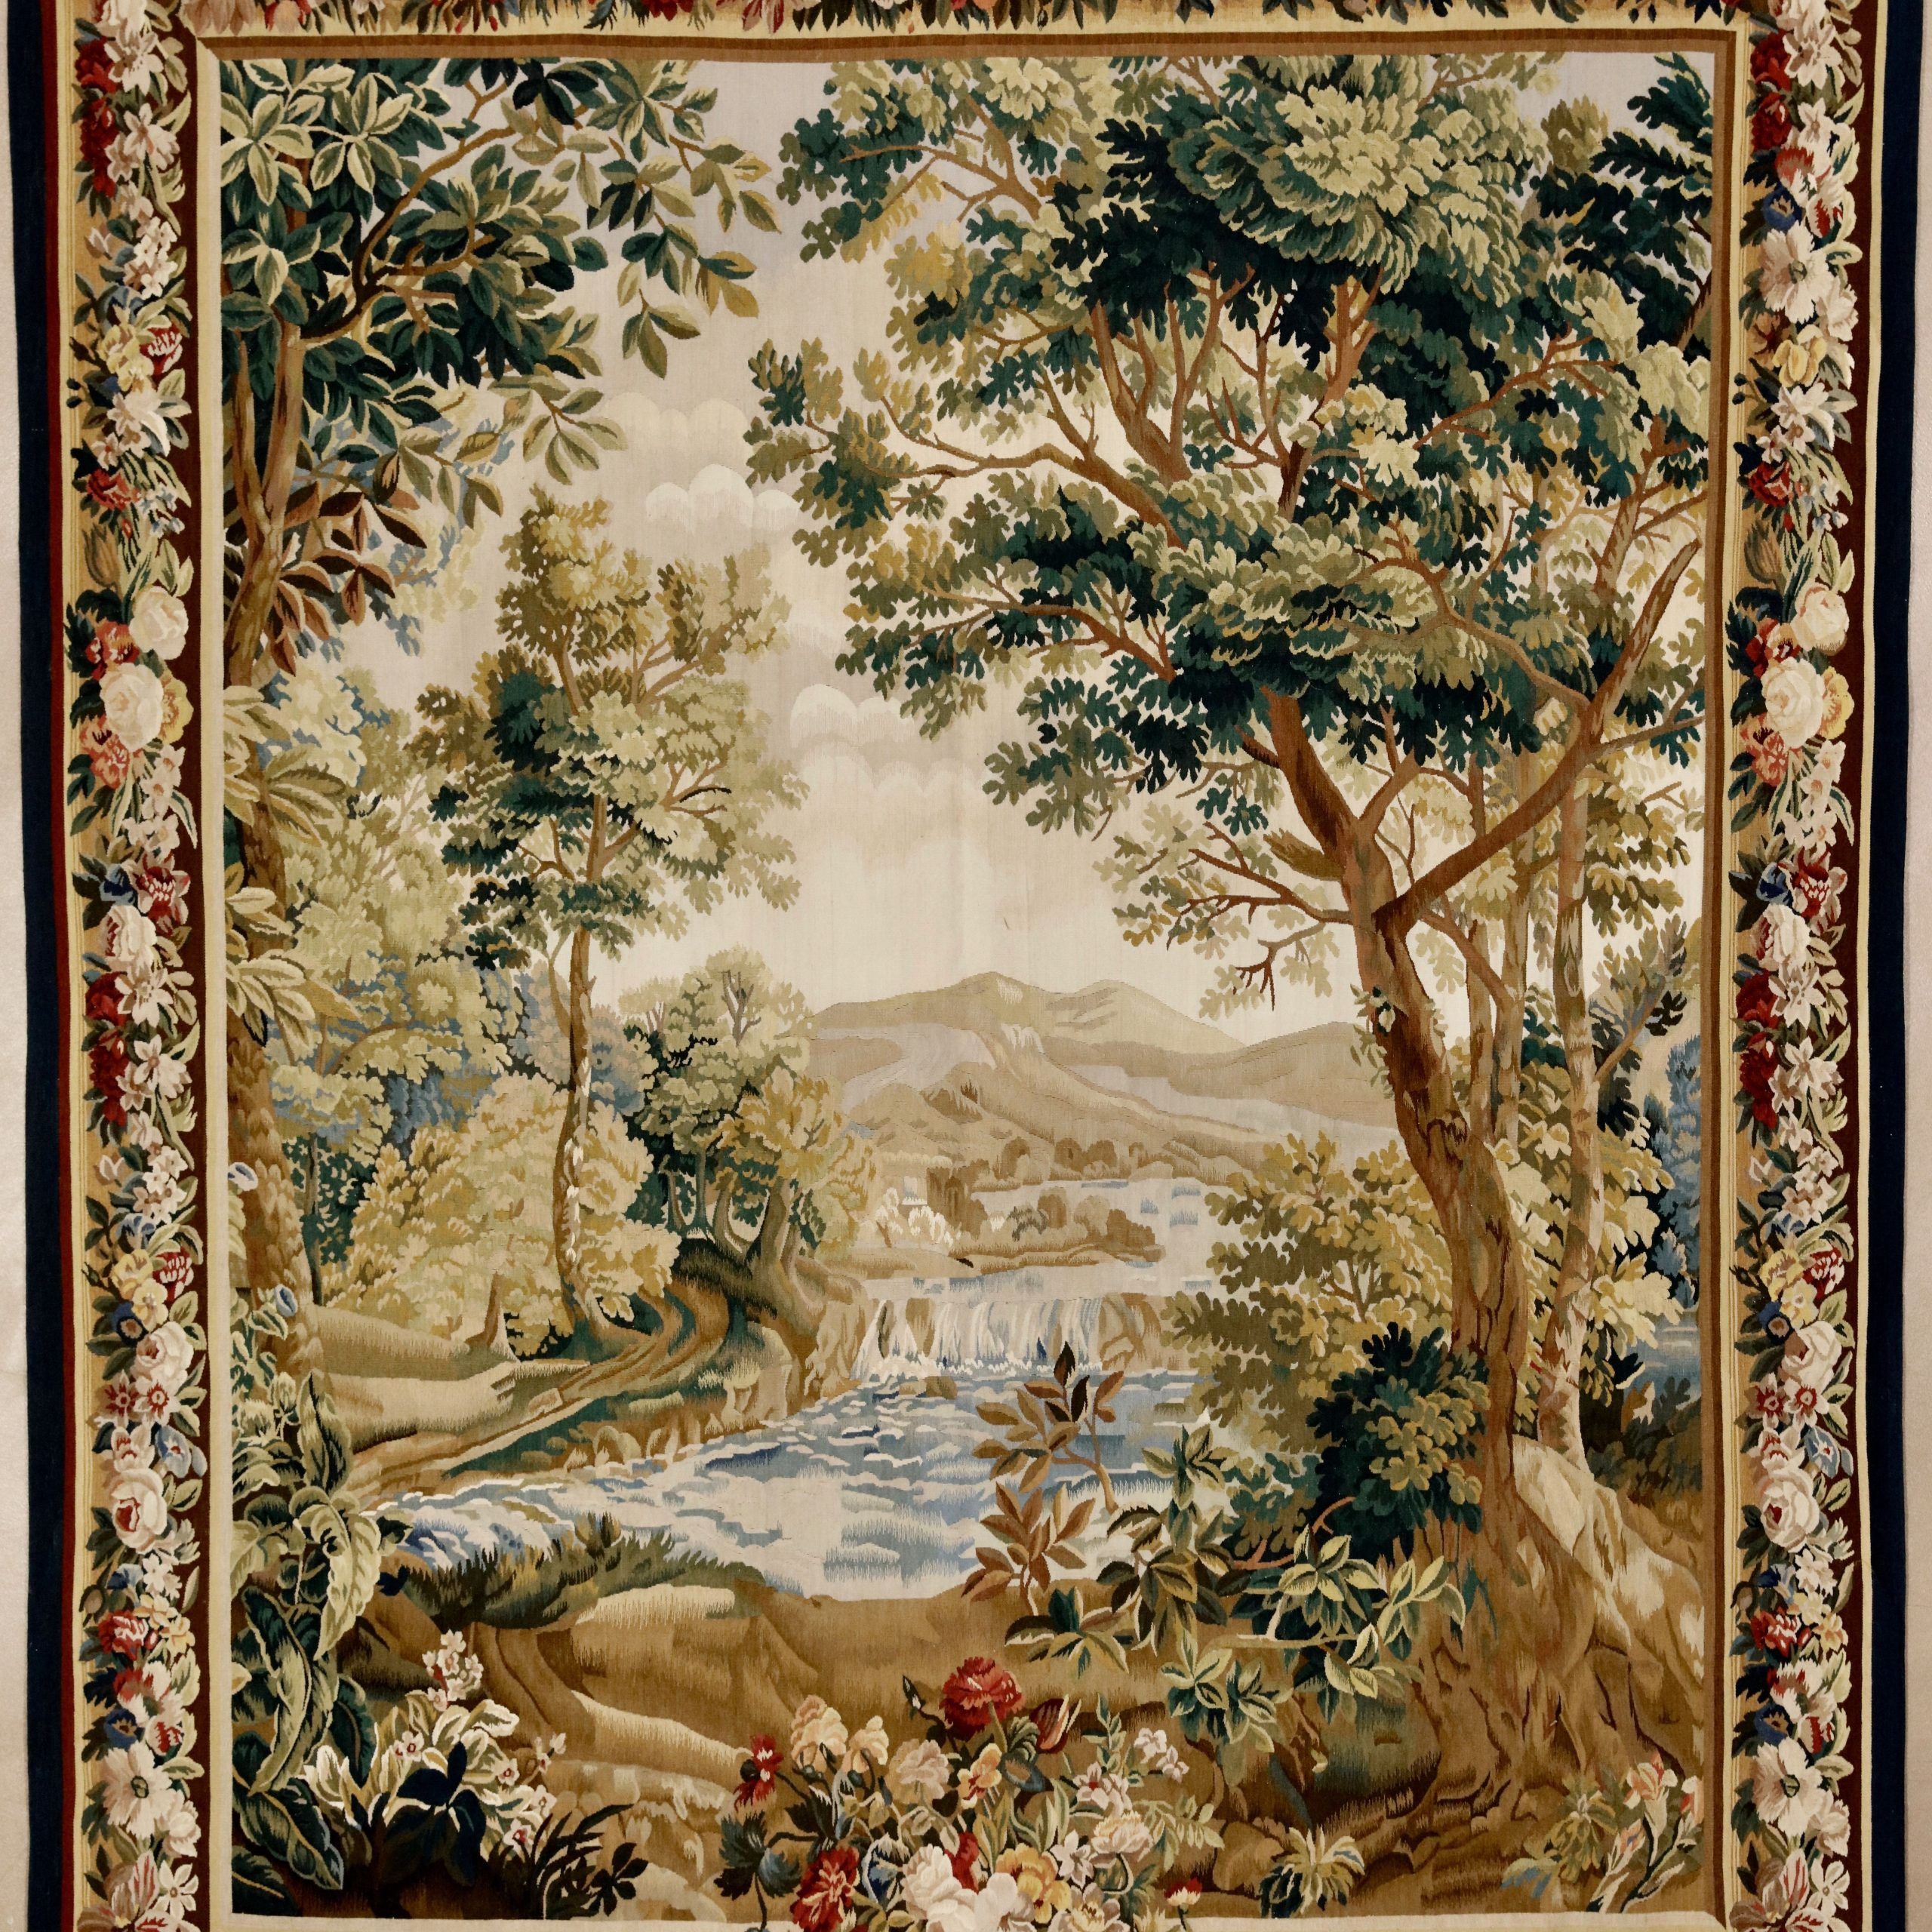 100+ Tapestry Ideas | Tapestry, Art, Medieval Tapestry Intended For Latest Blended Fabric Saint Joseph European Tapestries (View 19 of 20)